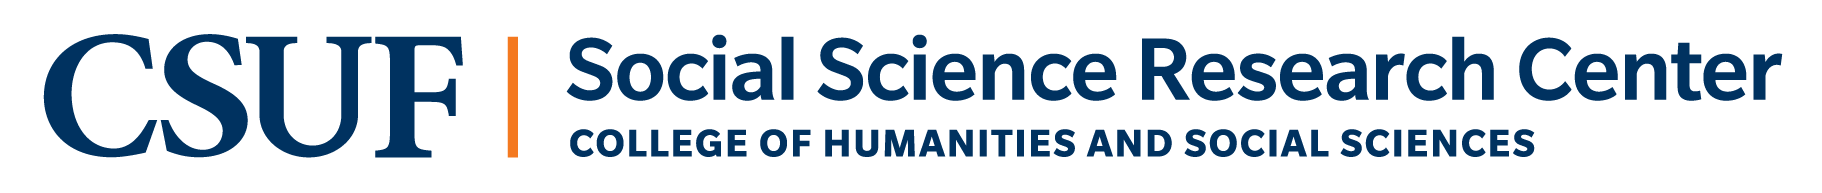 logo for Social Science Research Center at Cal State Fullerton